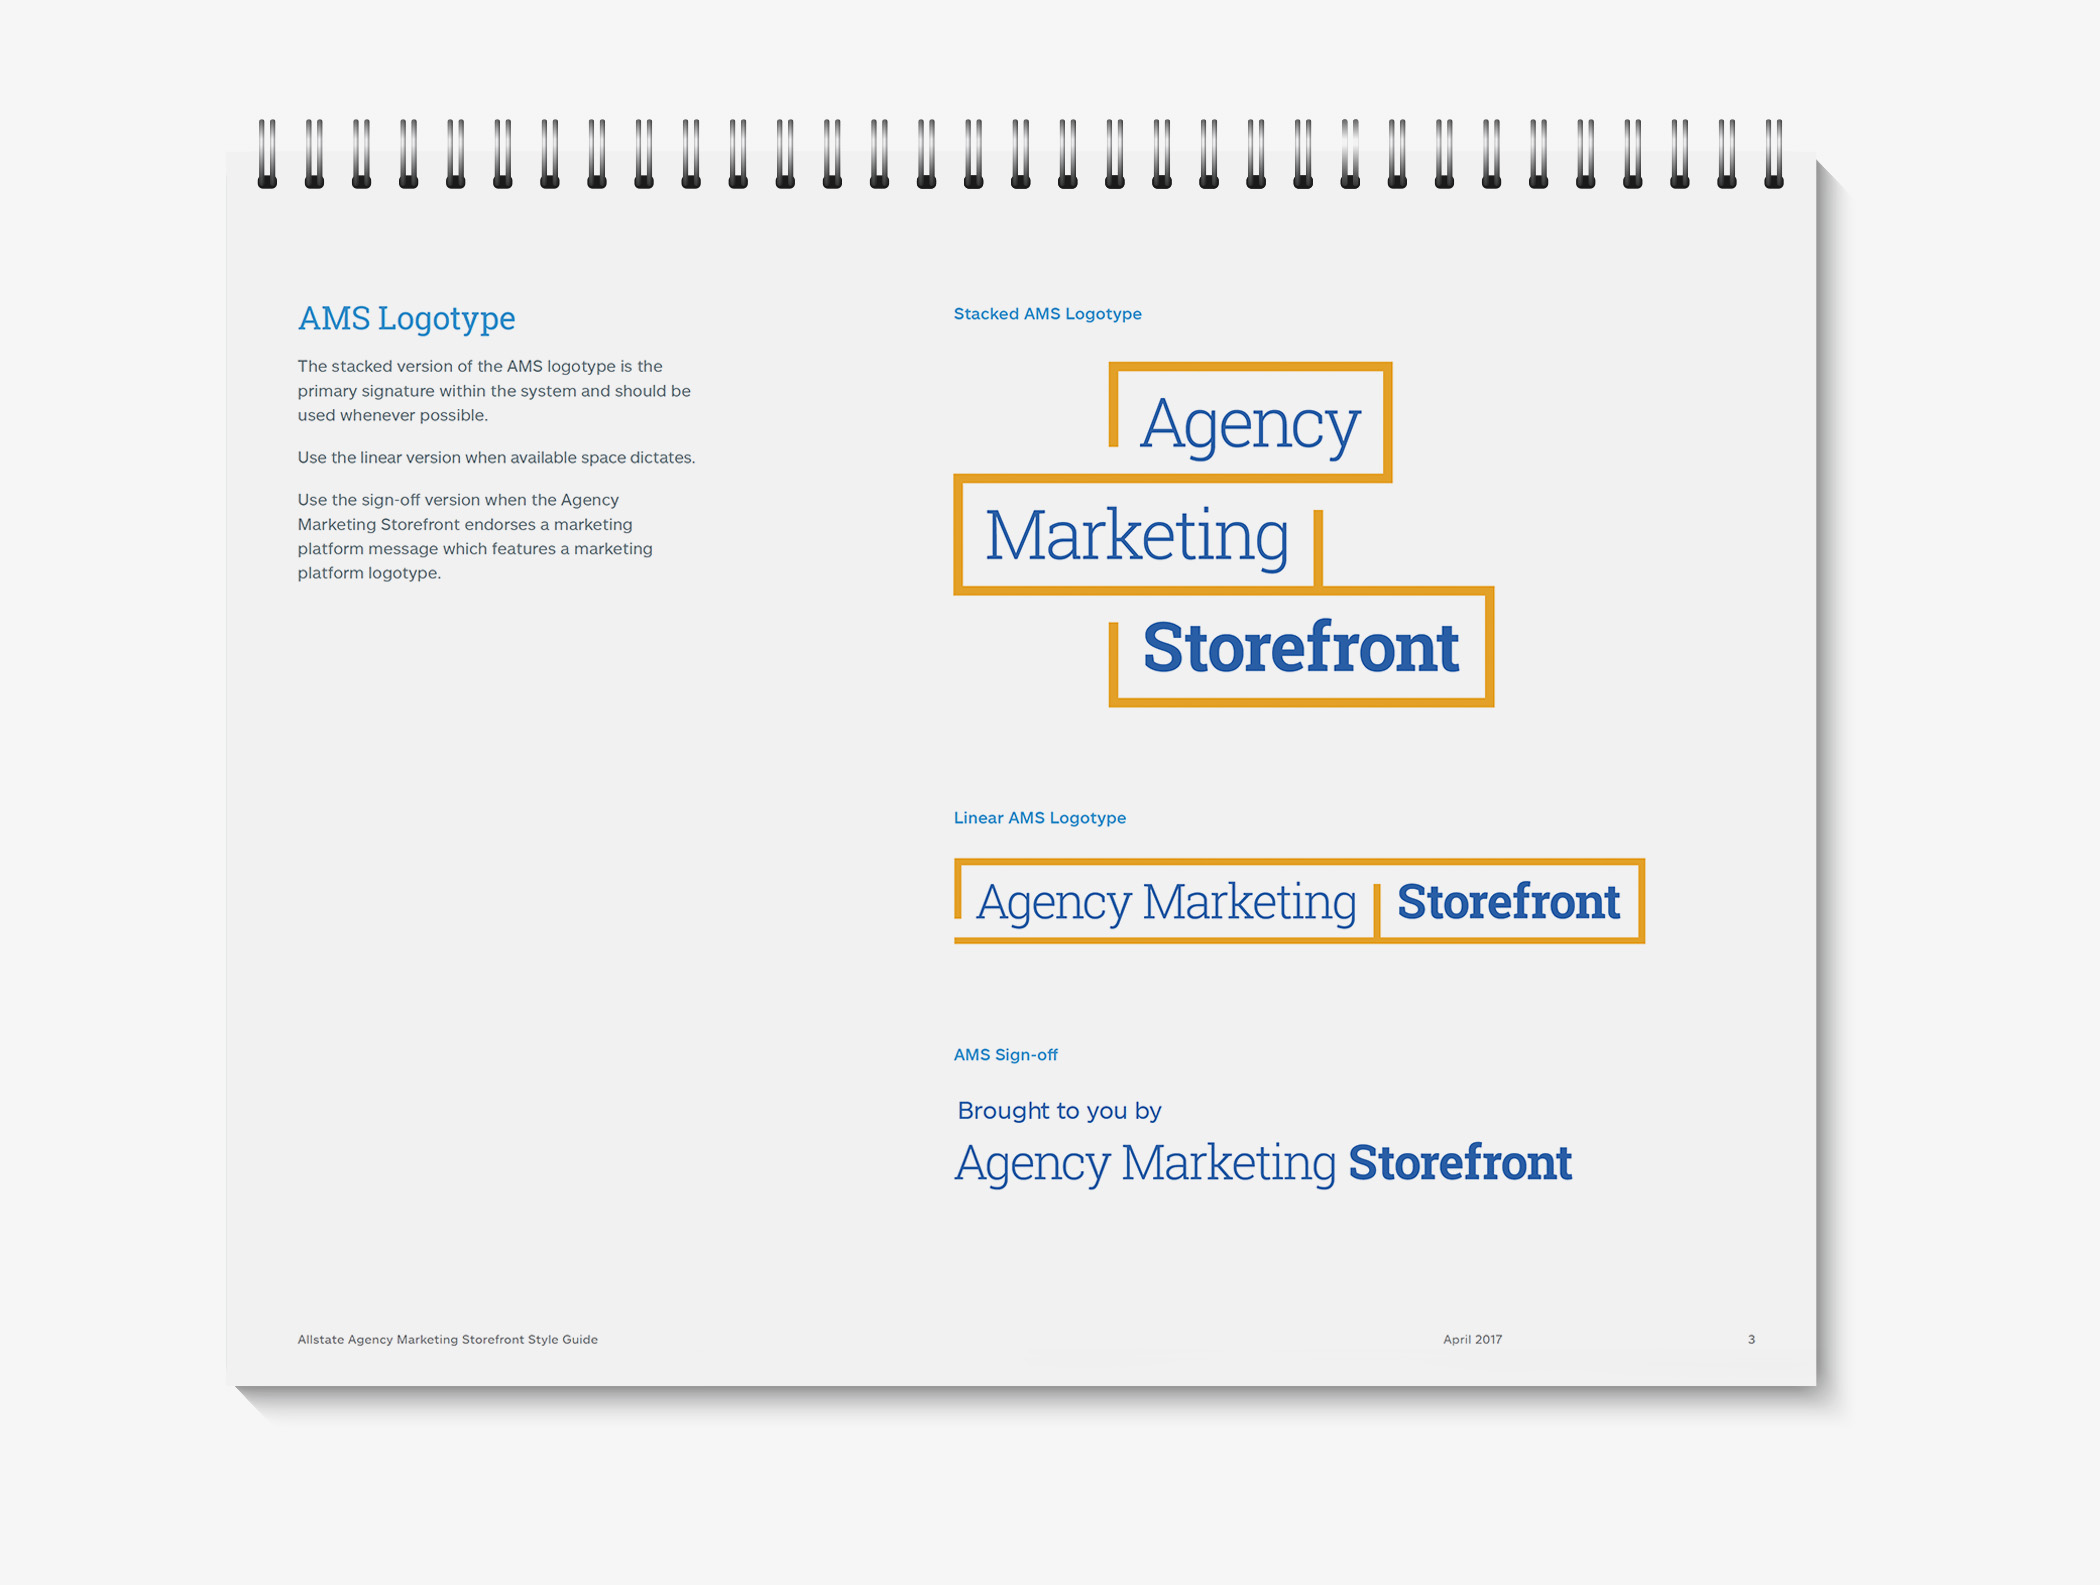 Page from the Allstate Agency Marketing Storefront brand guide showing logotype usage guidelines.